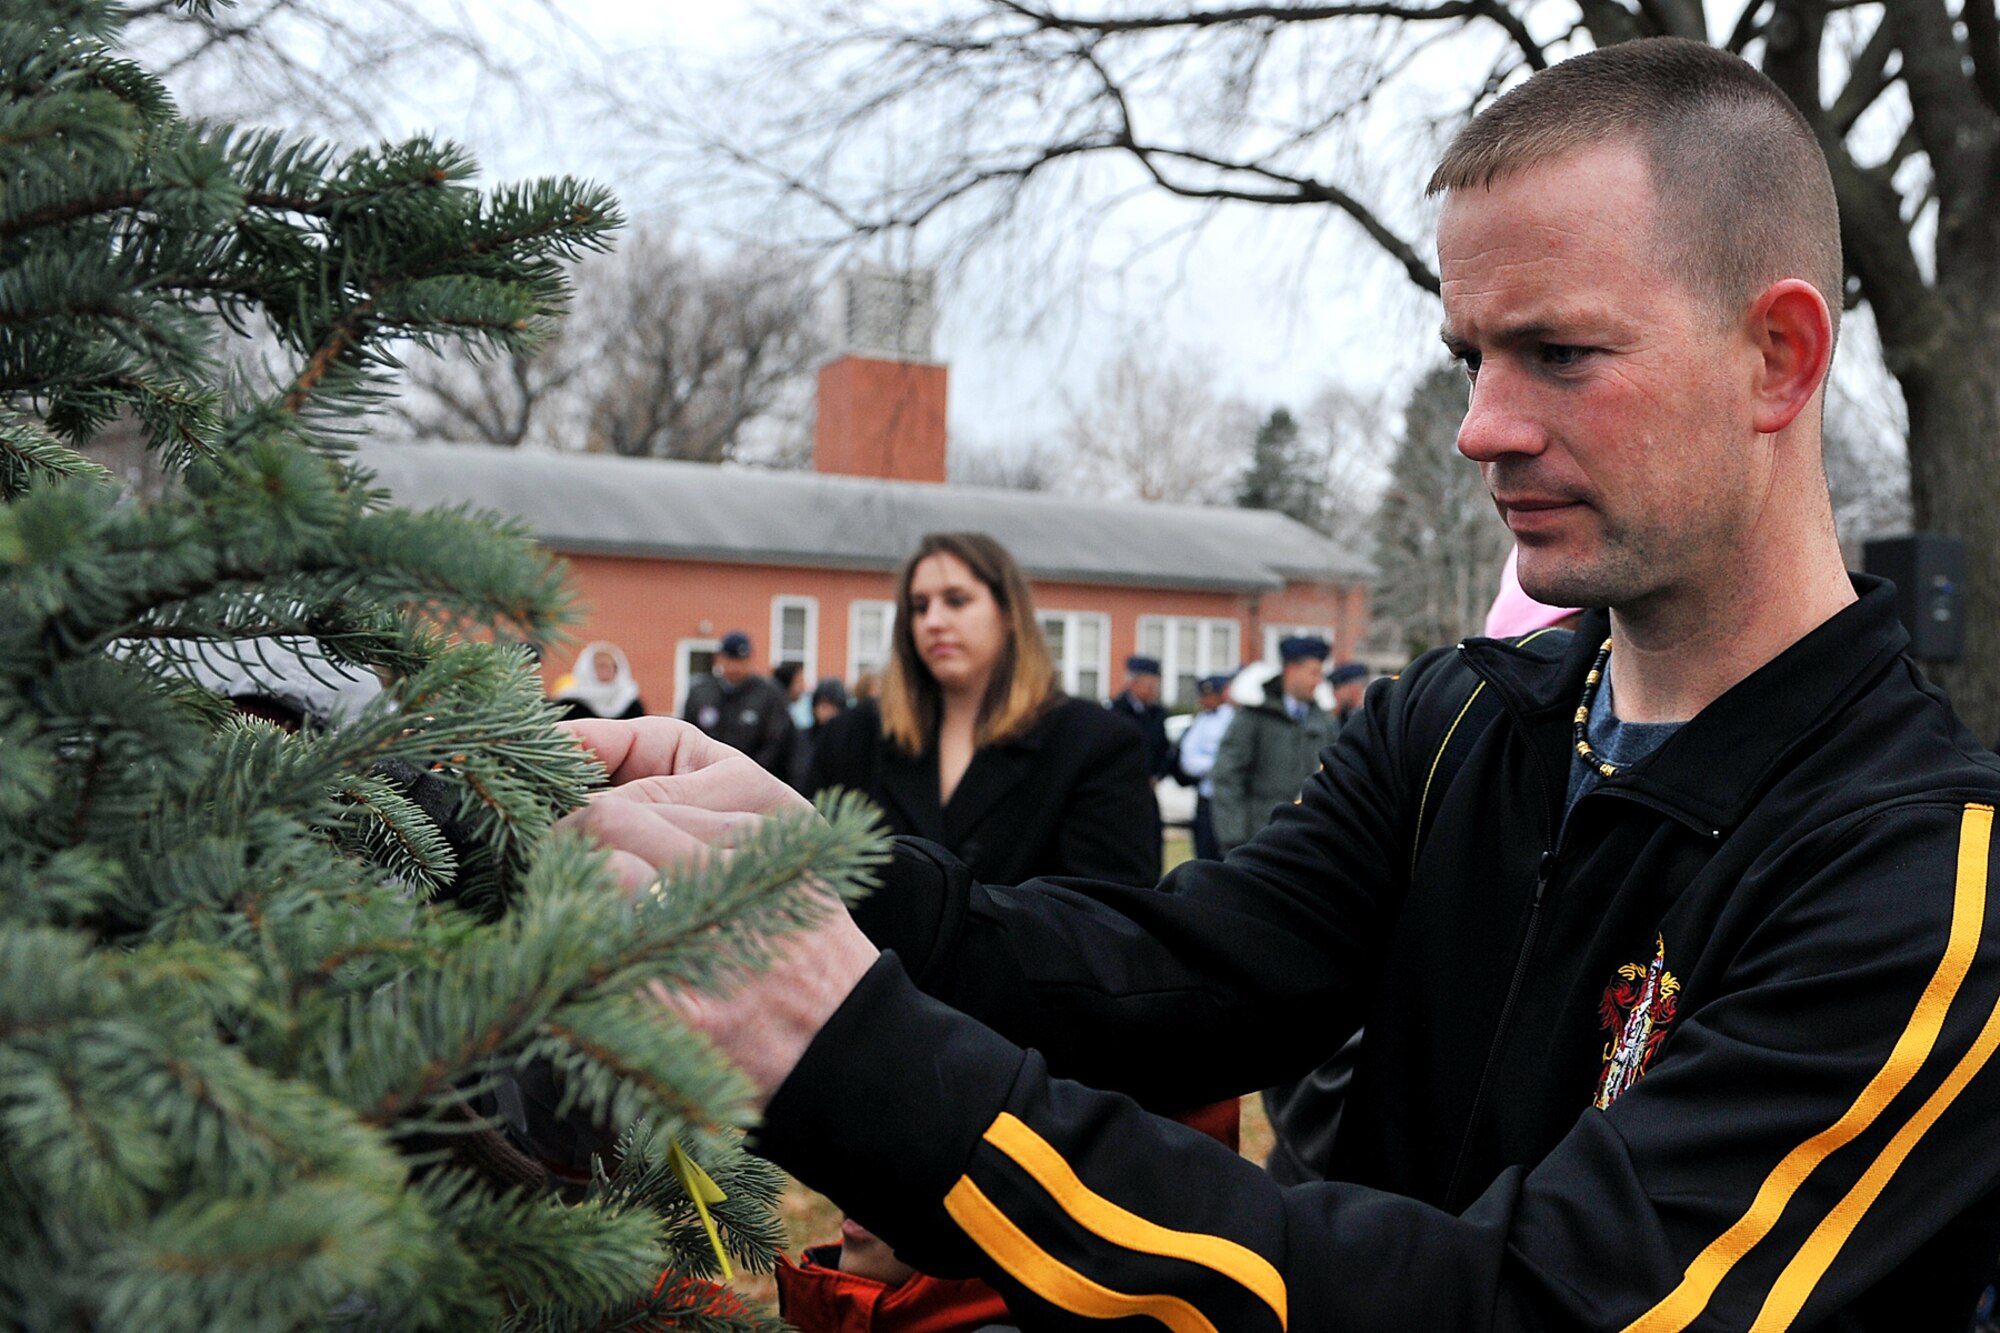 OFFUTT AIR FORCE BASE, Neb. - Staff Sgt. Ryan Paul, 55th Security Forces Squadron, places a ribbon on the hero tree during a special dedication ceremony at Offutt's new Hero Park outside the SAC Memorial Chapel Nov. 29. Personnel from the Offutt community will be able to gather at the hero tree to meditate, reflect on and pray for their deployed love ones. U.S. Air Force photo by Charles Haymond (Released)